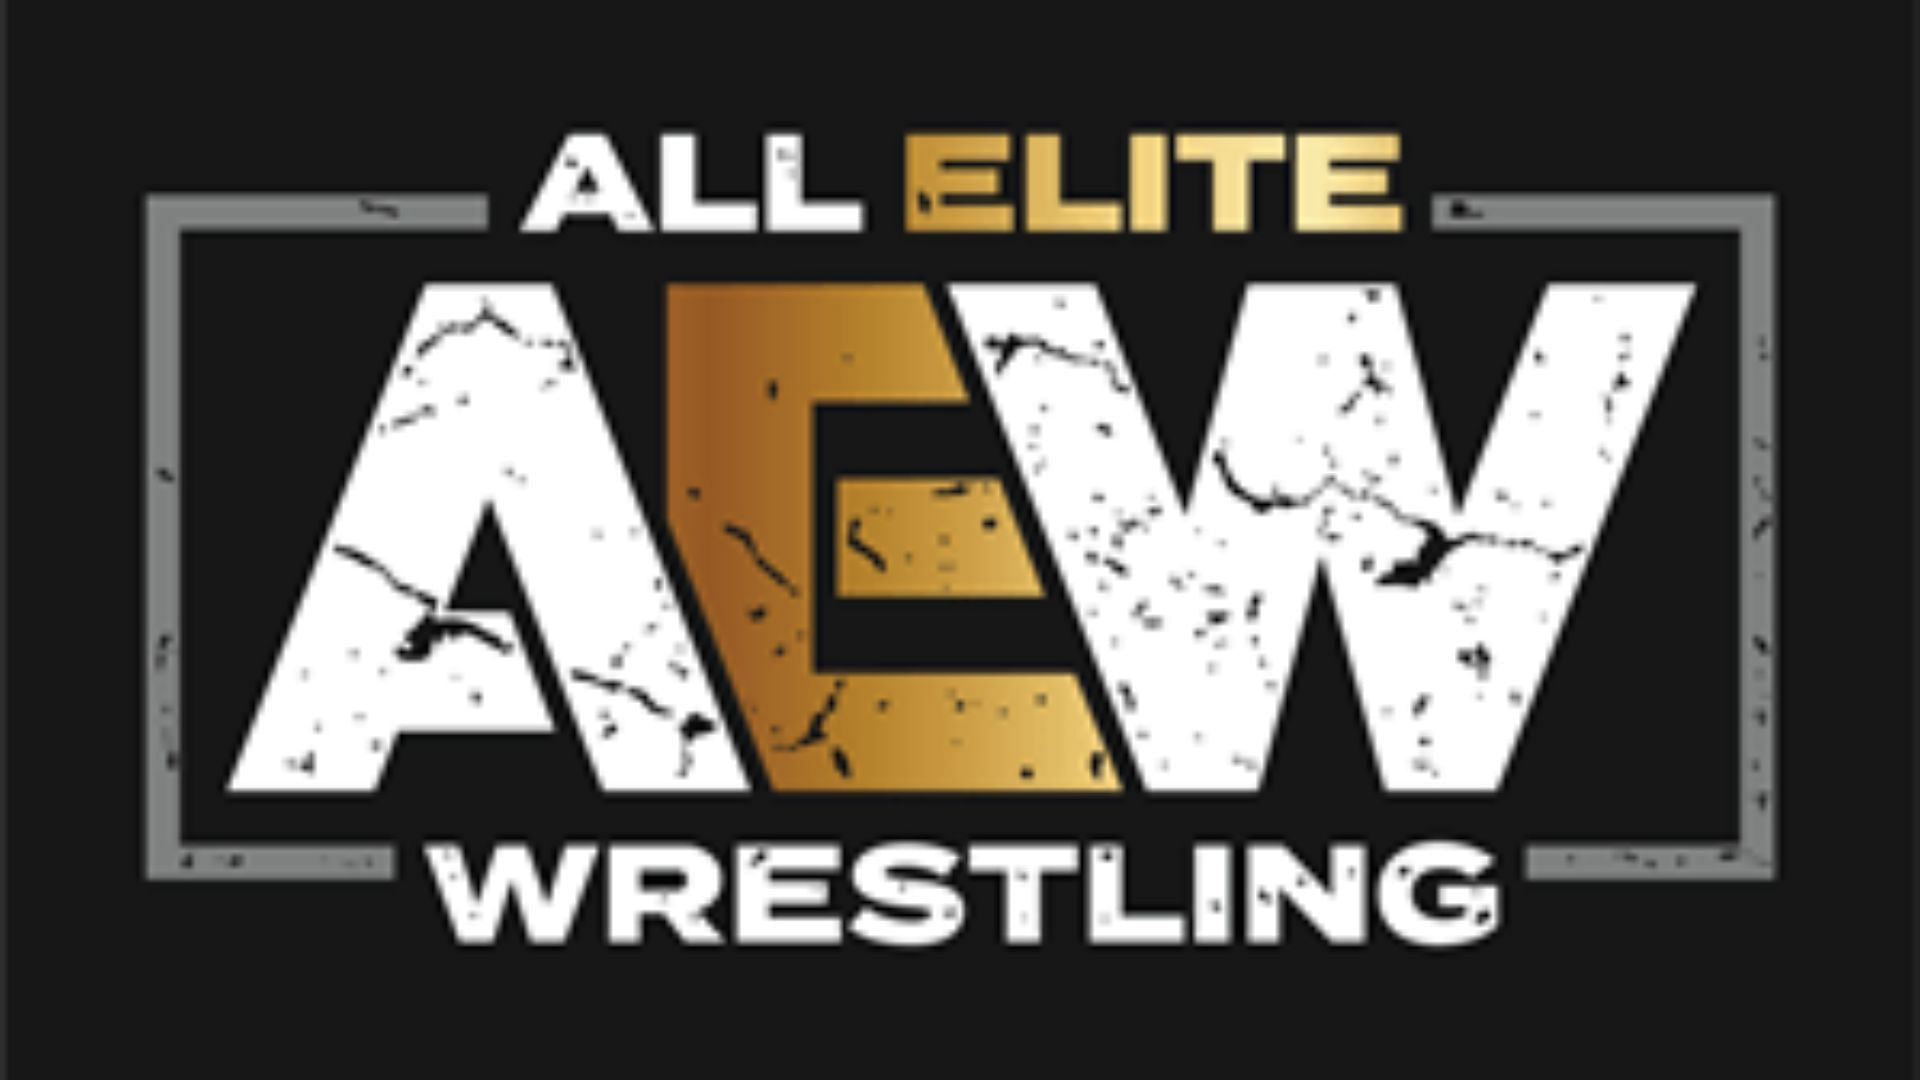 AEW is the rival promotion to WWE